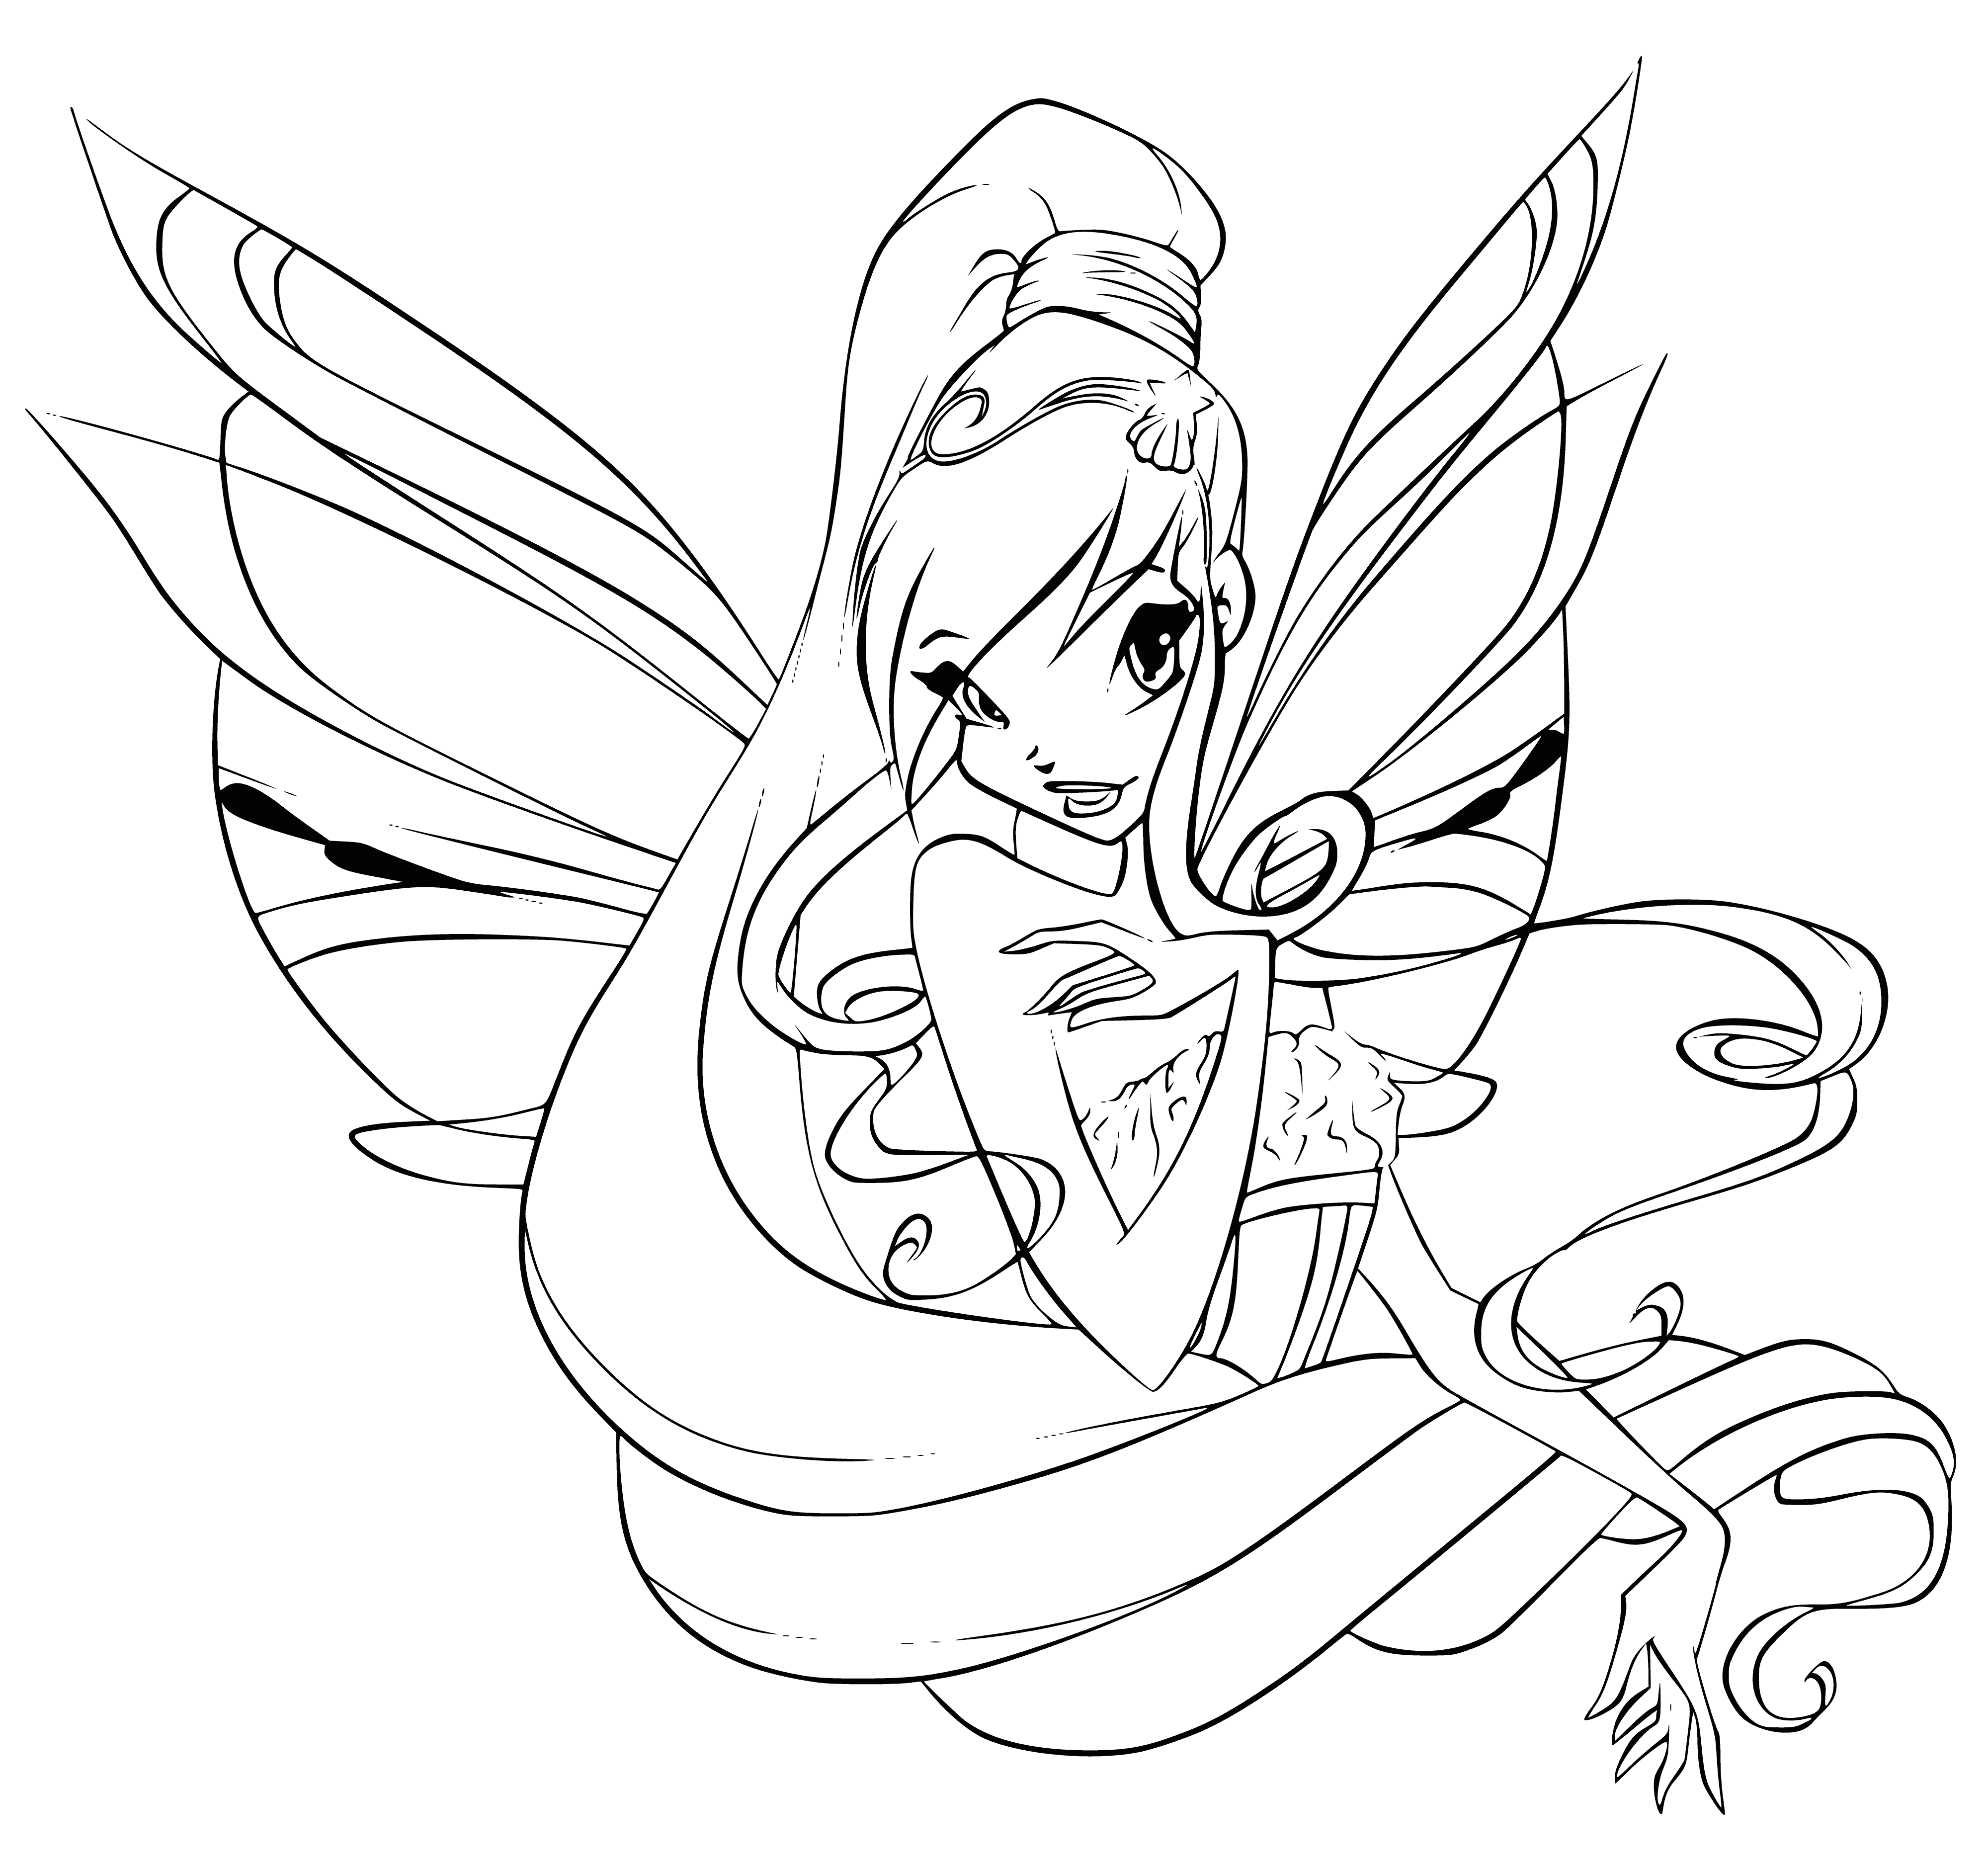 coloring page: A beautiful woman with wings, billowing hair, and a white dress. Ready to fly away with strength and power.